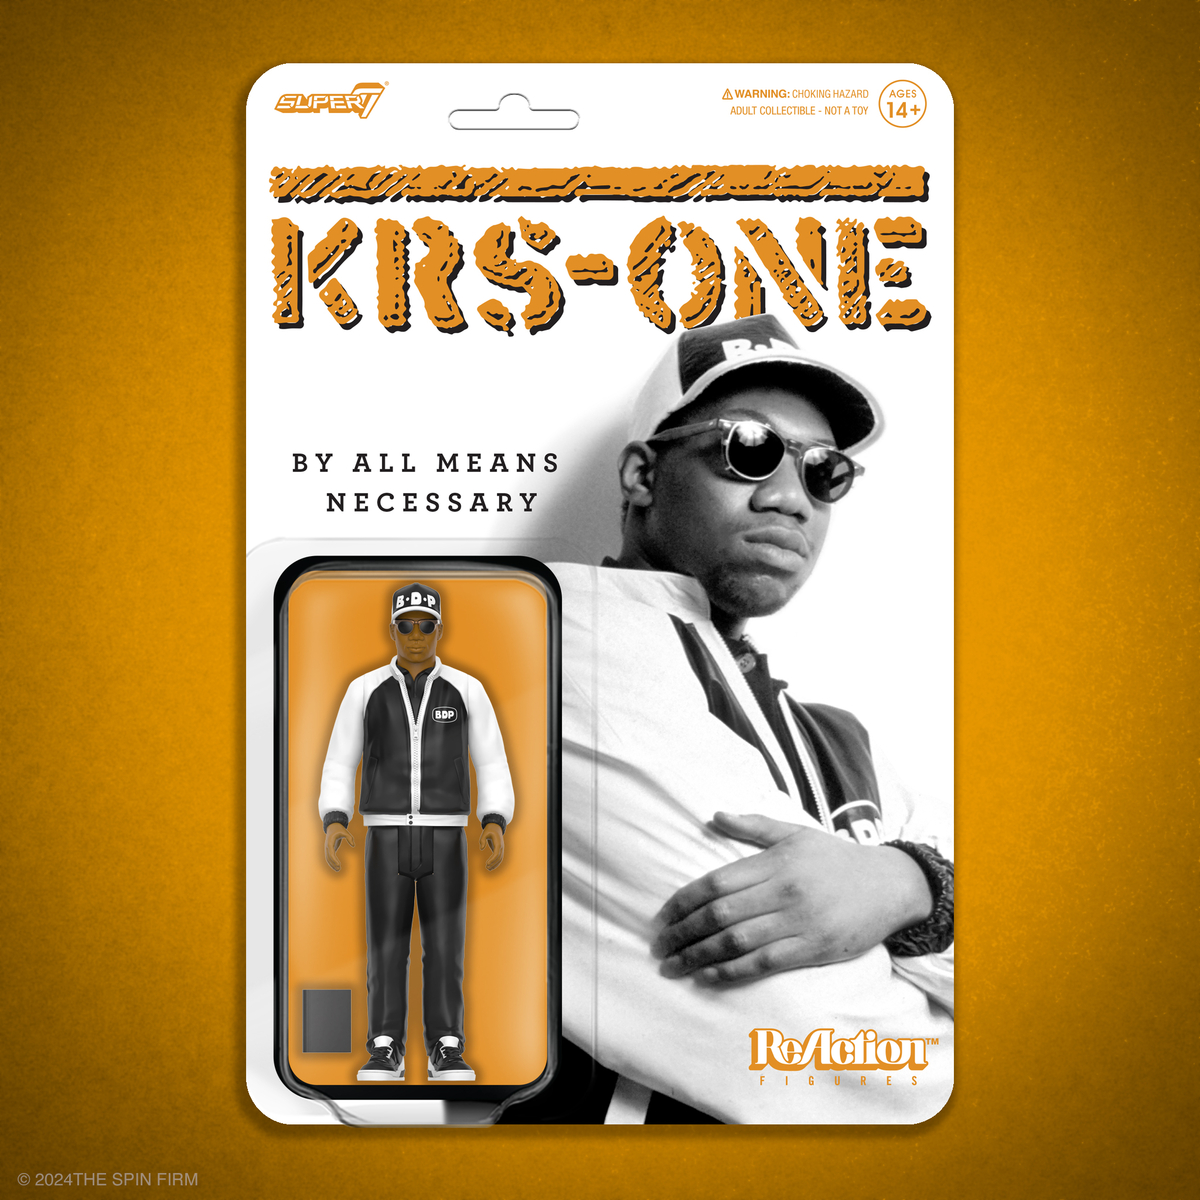 This articulated, 3.75” scale KRS-One ReAction Figure is inspired by the cover art from Boogie Down Productions’ album By All Means Necessary and includes a book accessory. Available now at Super7.com! #super7